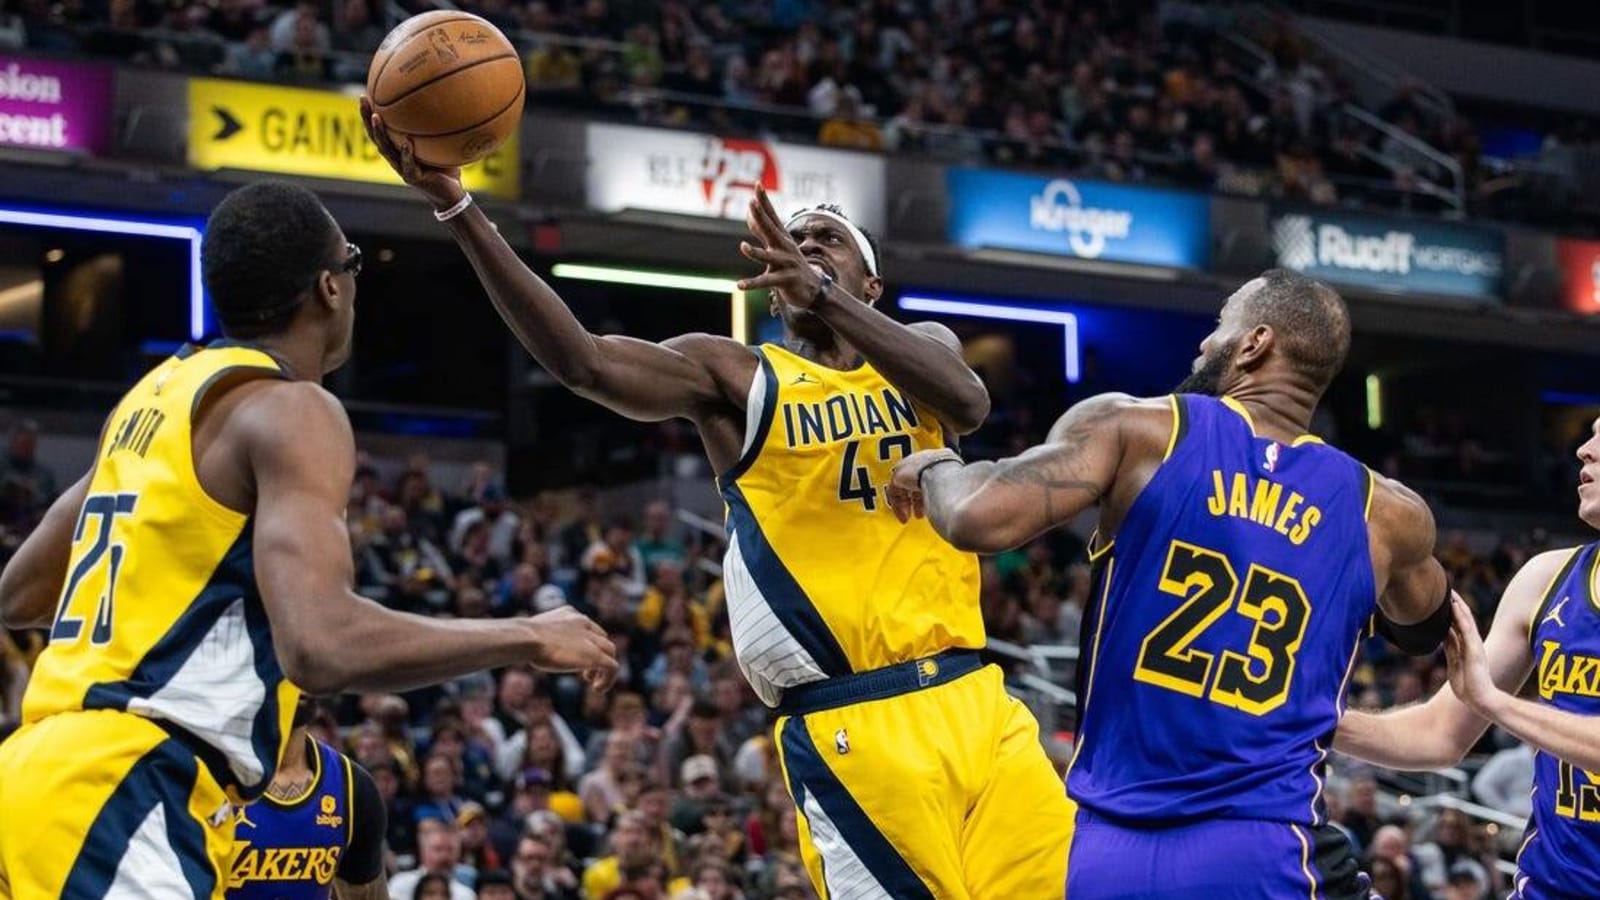 Pacers, in tight race for 6th in East, face Nets twice